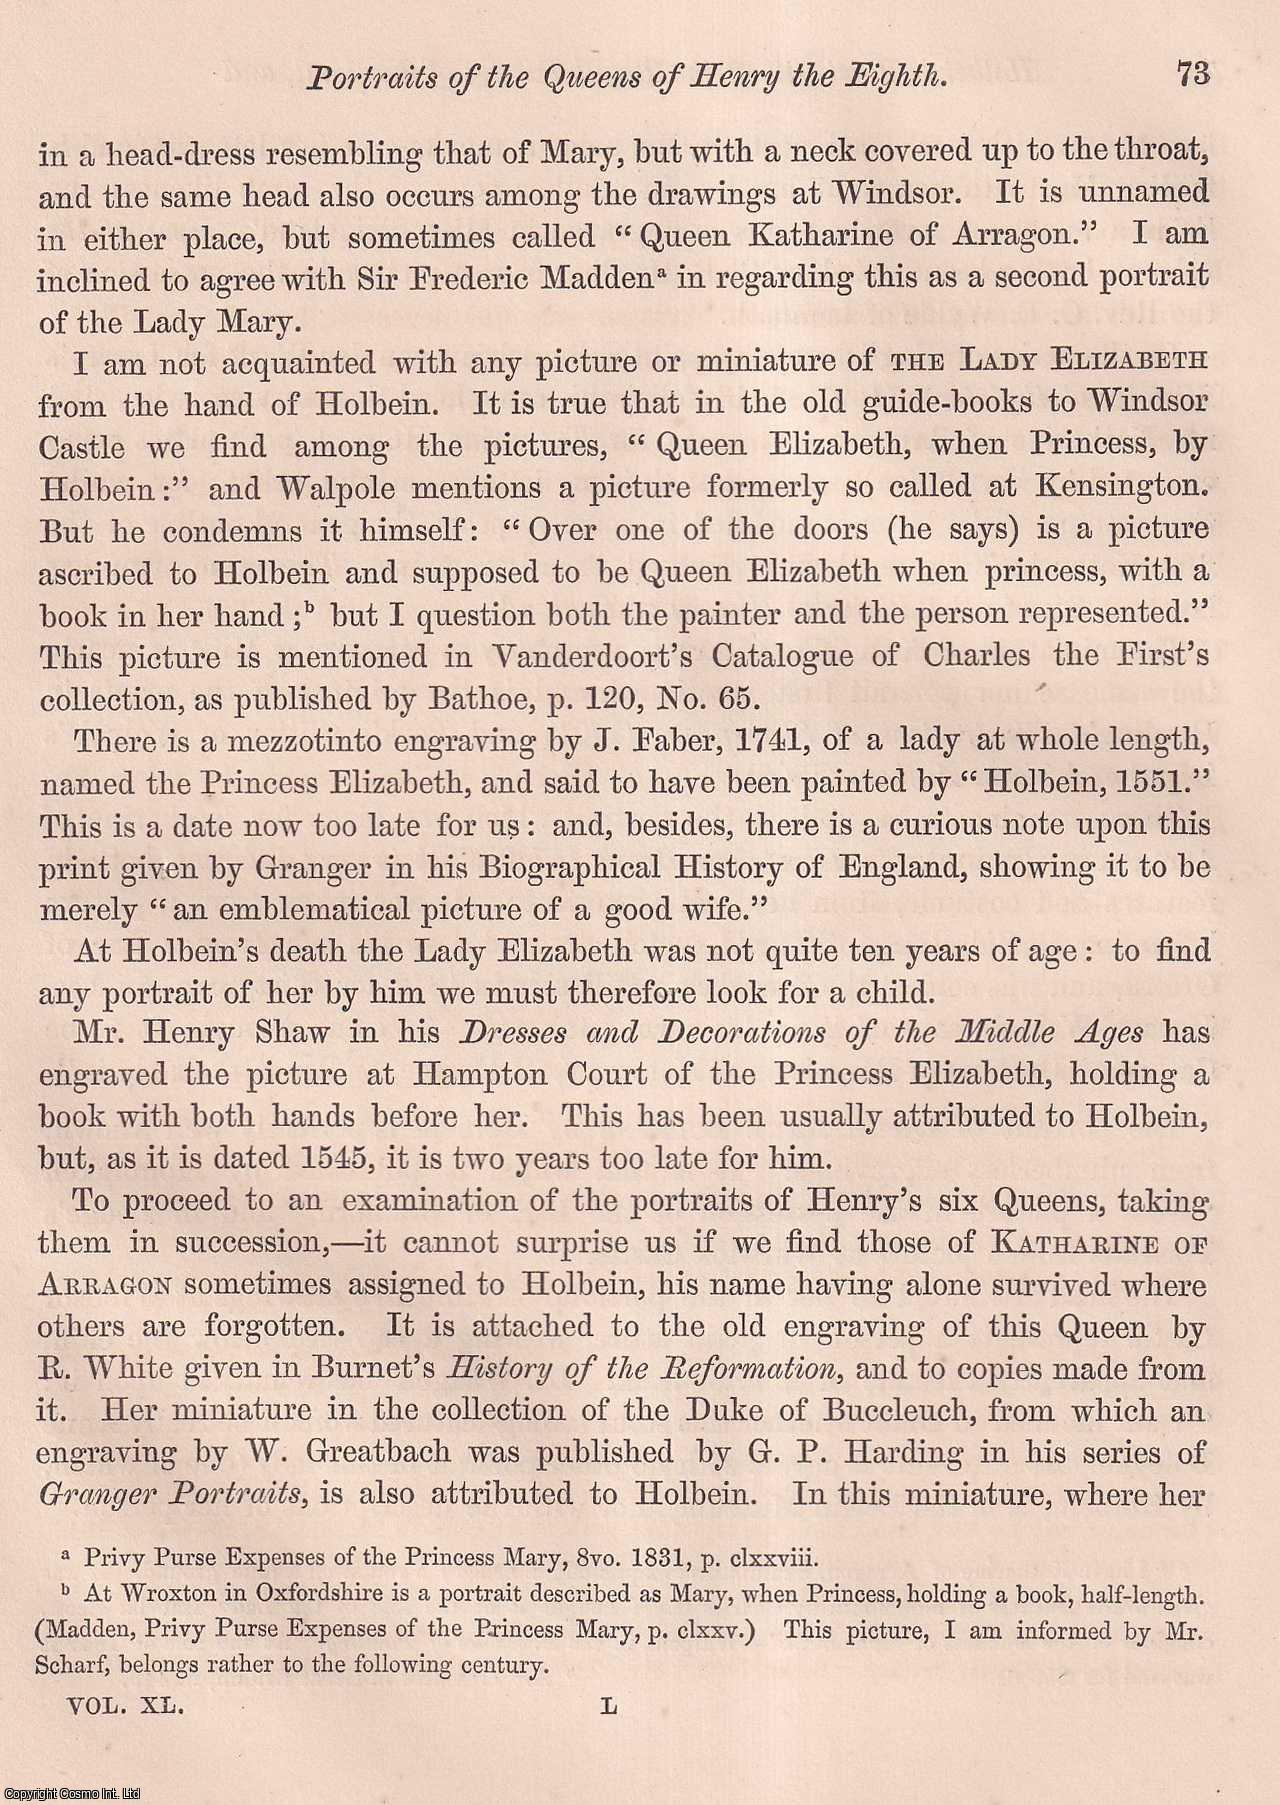 John Gough Nichols, Esq., F.S.A. - Remarks upon Holbein's Portraits of the Royal Family of England, and more particularly upon the several Portraits of the Queens of Henry the Eighth. An uncommon original article from the journal Archaeologia, 1866.